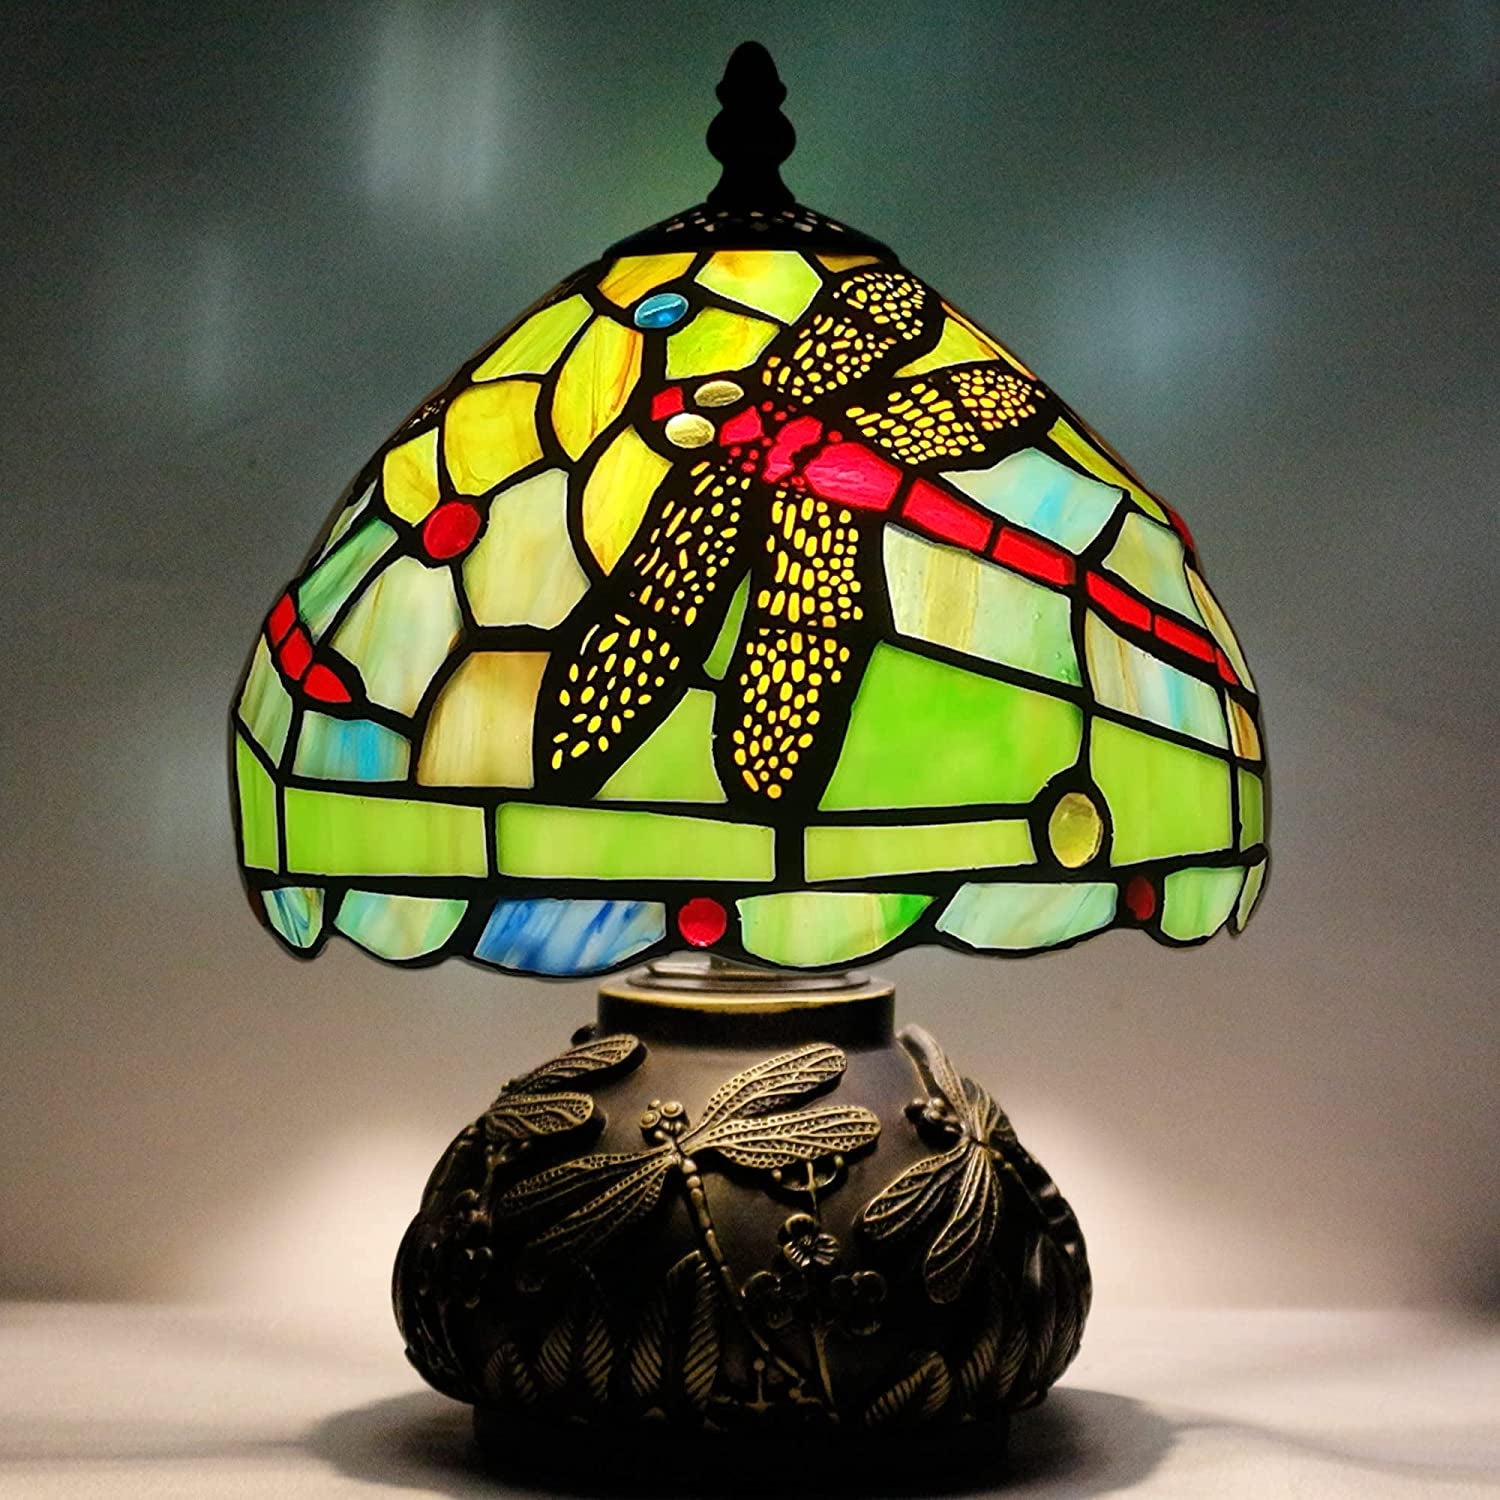 Werfactory® Tiffany Lamp W8H11 Inch Stained Glass Red Dragonfly Style Table Lamp Mushroom Lamp